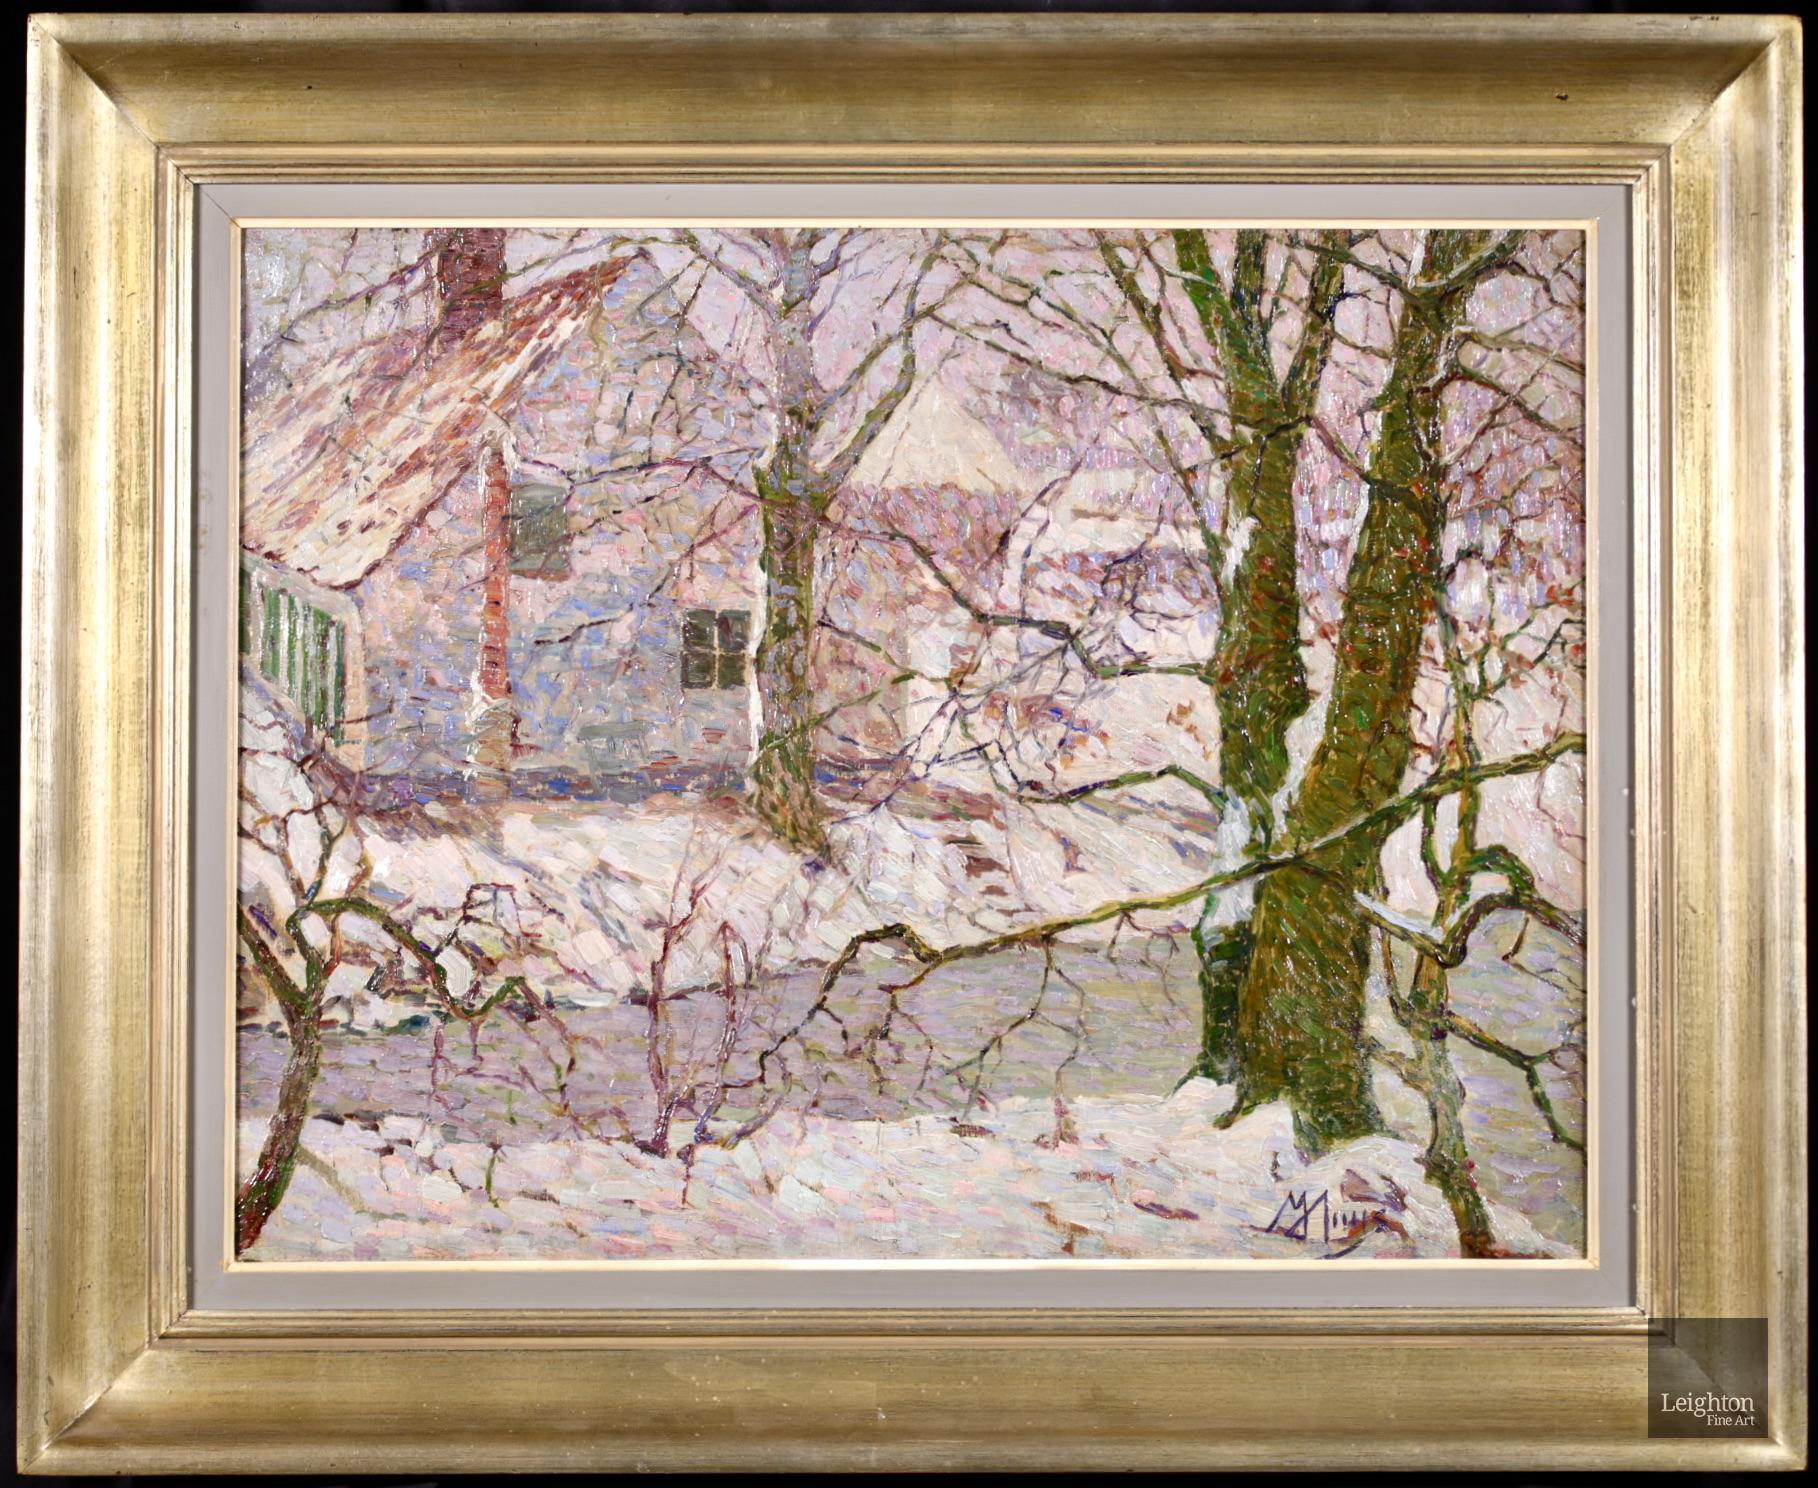 Snow on the Farm - Post Impressionist Oil, Snowy Winter Landscape by Modest Huys